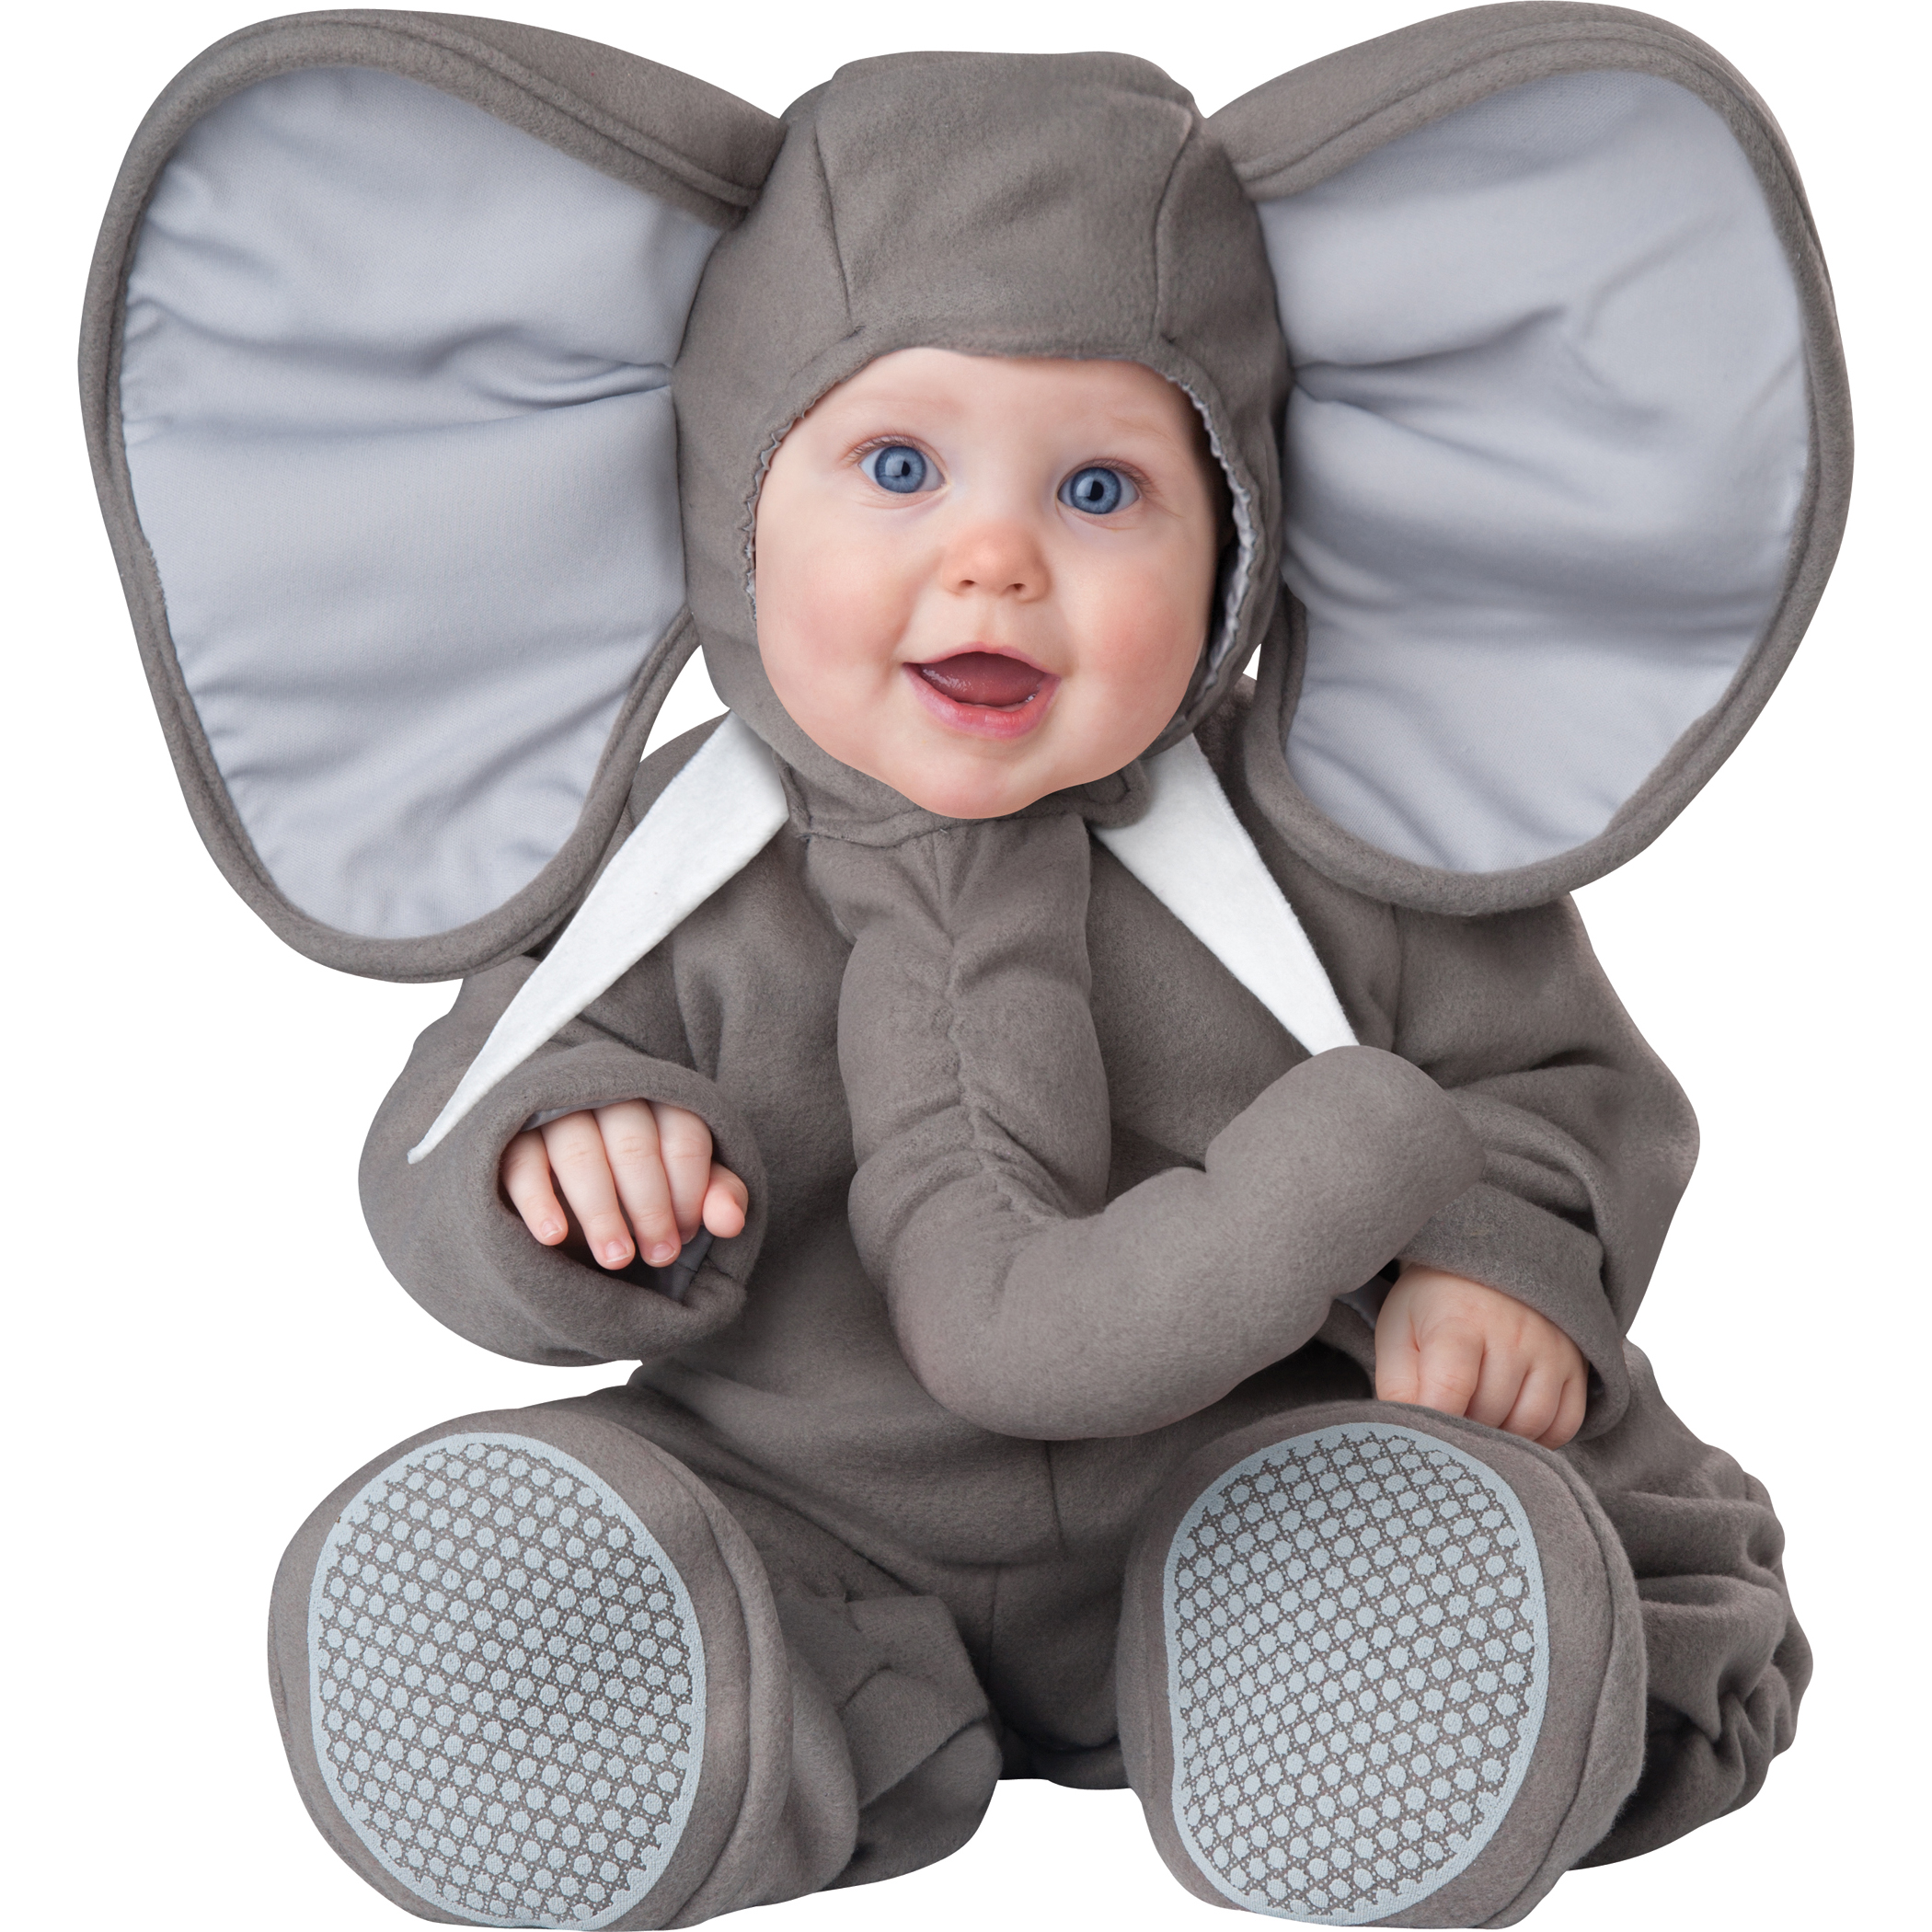 Totally Ghoul Elephant Toddler Halloween Costume